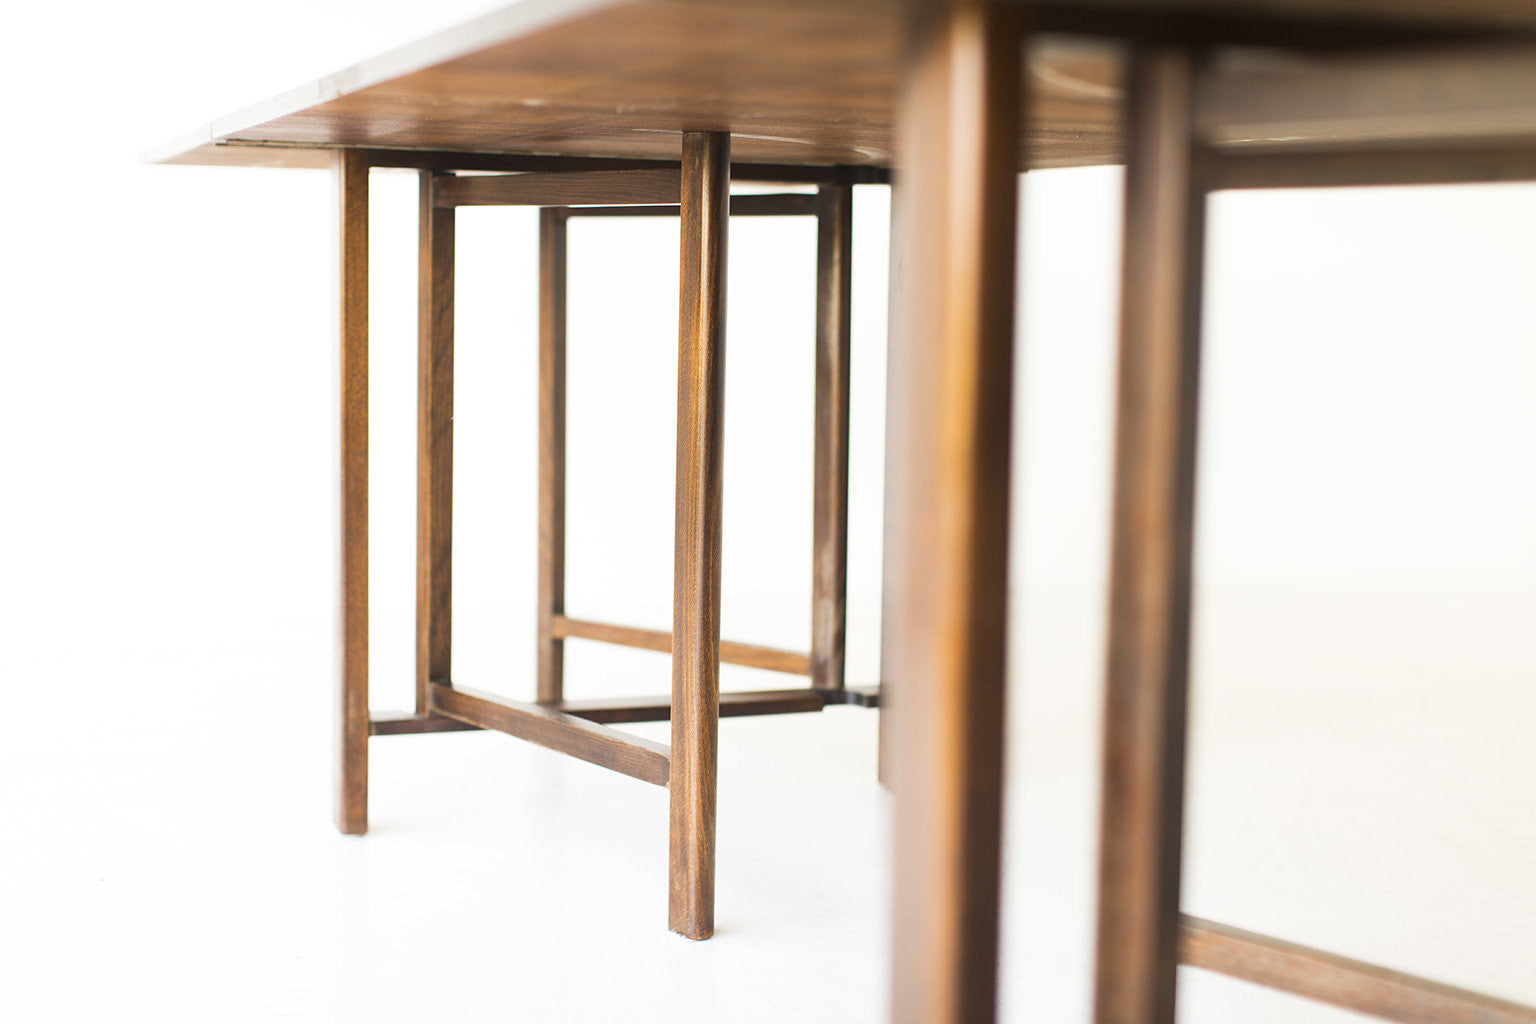 Bruno Mathsson Rosewood Dining Table - 06191702